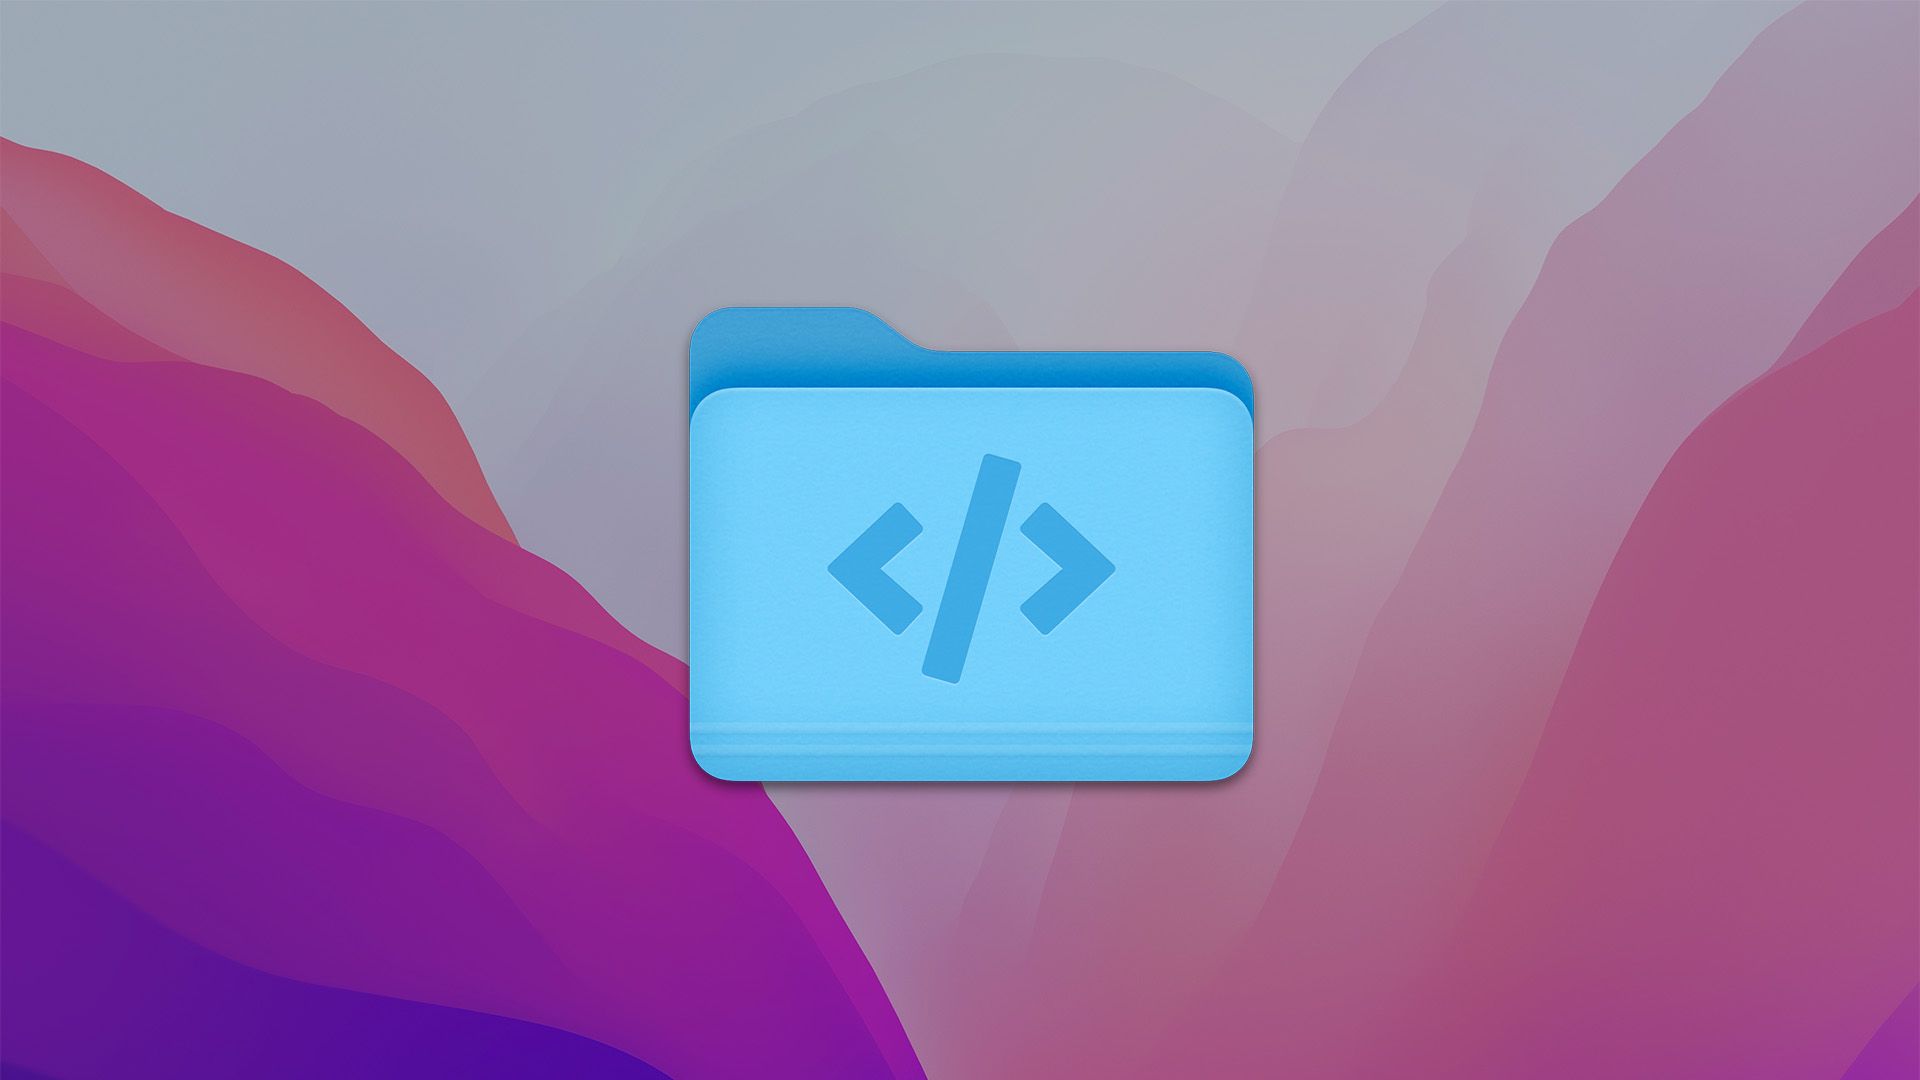 en afspejle Pris How to create a custom macOS folder icon | This Dev Brain by Michal Tynior  | This Dev Brain by Michal Tynior